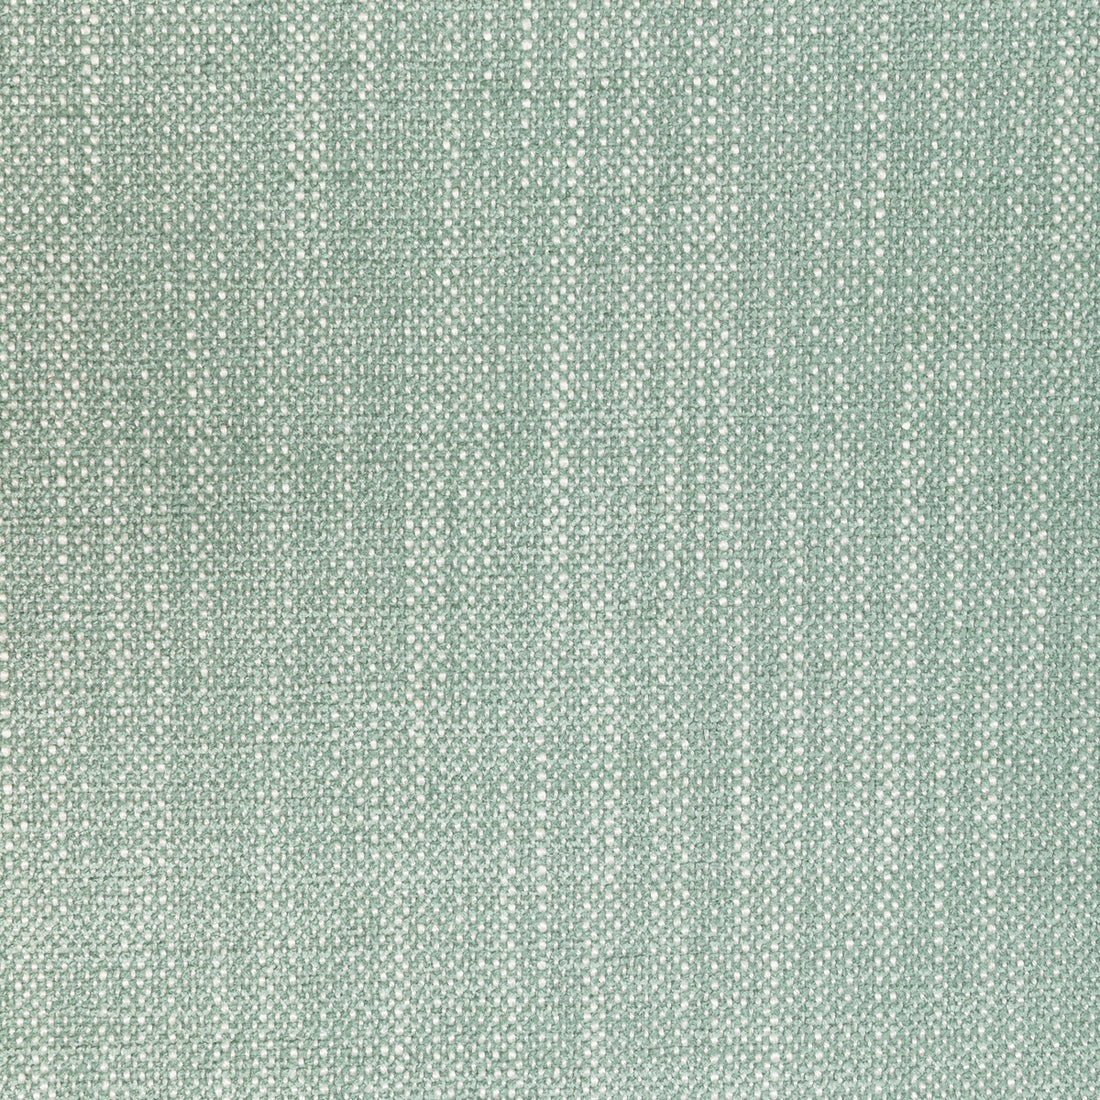 Kravet Design fabric in 36408-113 color - pattern 36408.113.0 - by Kravet Design in the Performance Crypton Home collection